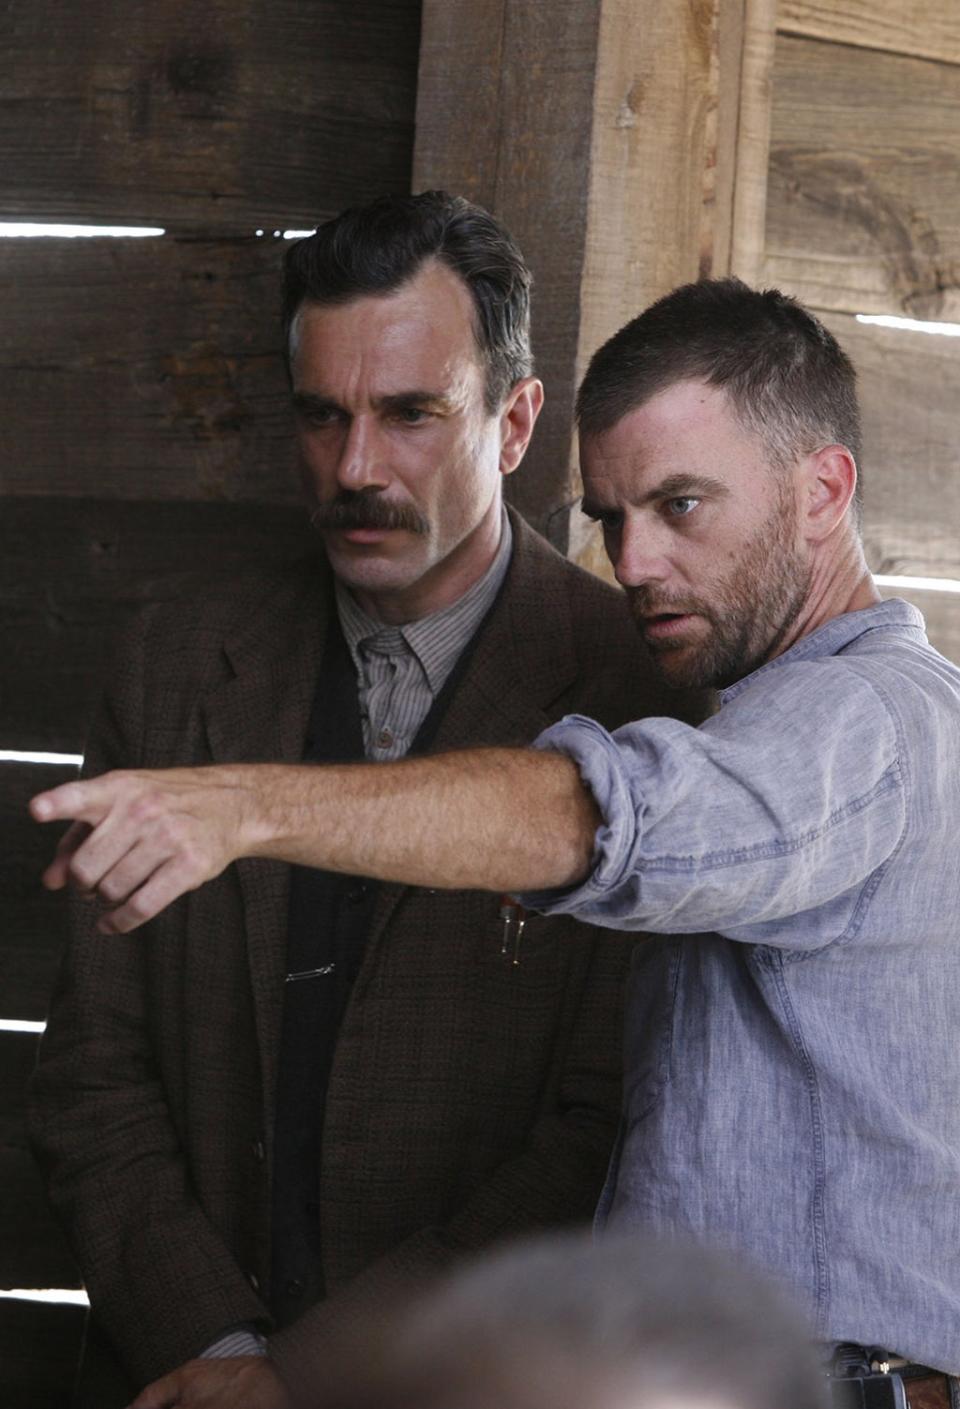 Paul Thomas Anderson directs Daniel Day-Lewis on the ‘There Will Be Blood’ set (Paramount/Vantage/Kobal/Shutterstock)